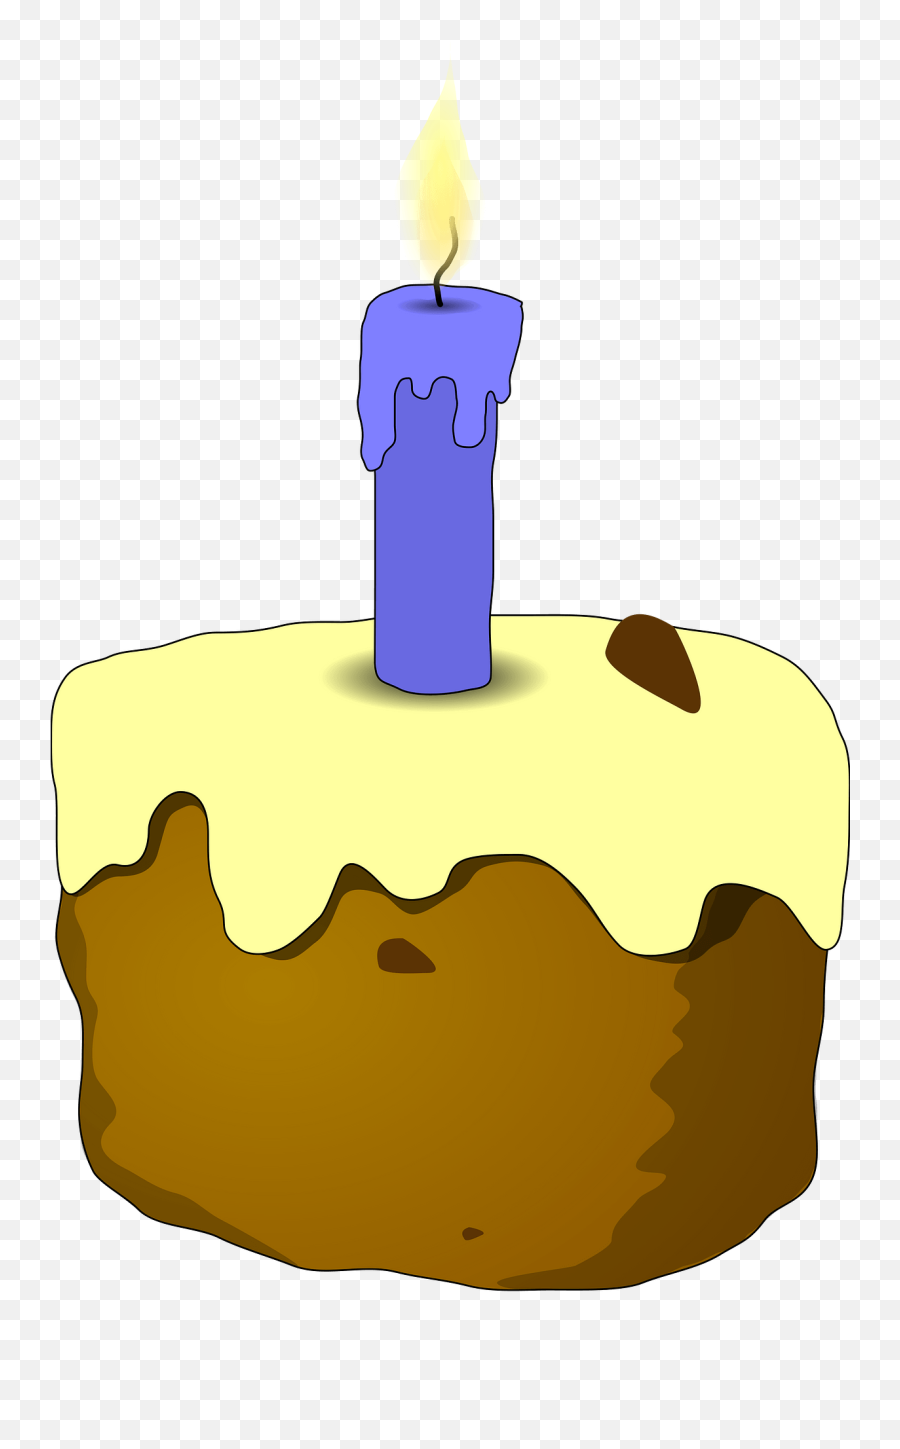 Cake And Candle Clipart Free Download Transparent Png - Cartoon Birthday Cake 1 Emoji,Candle Clipart